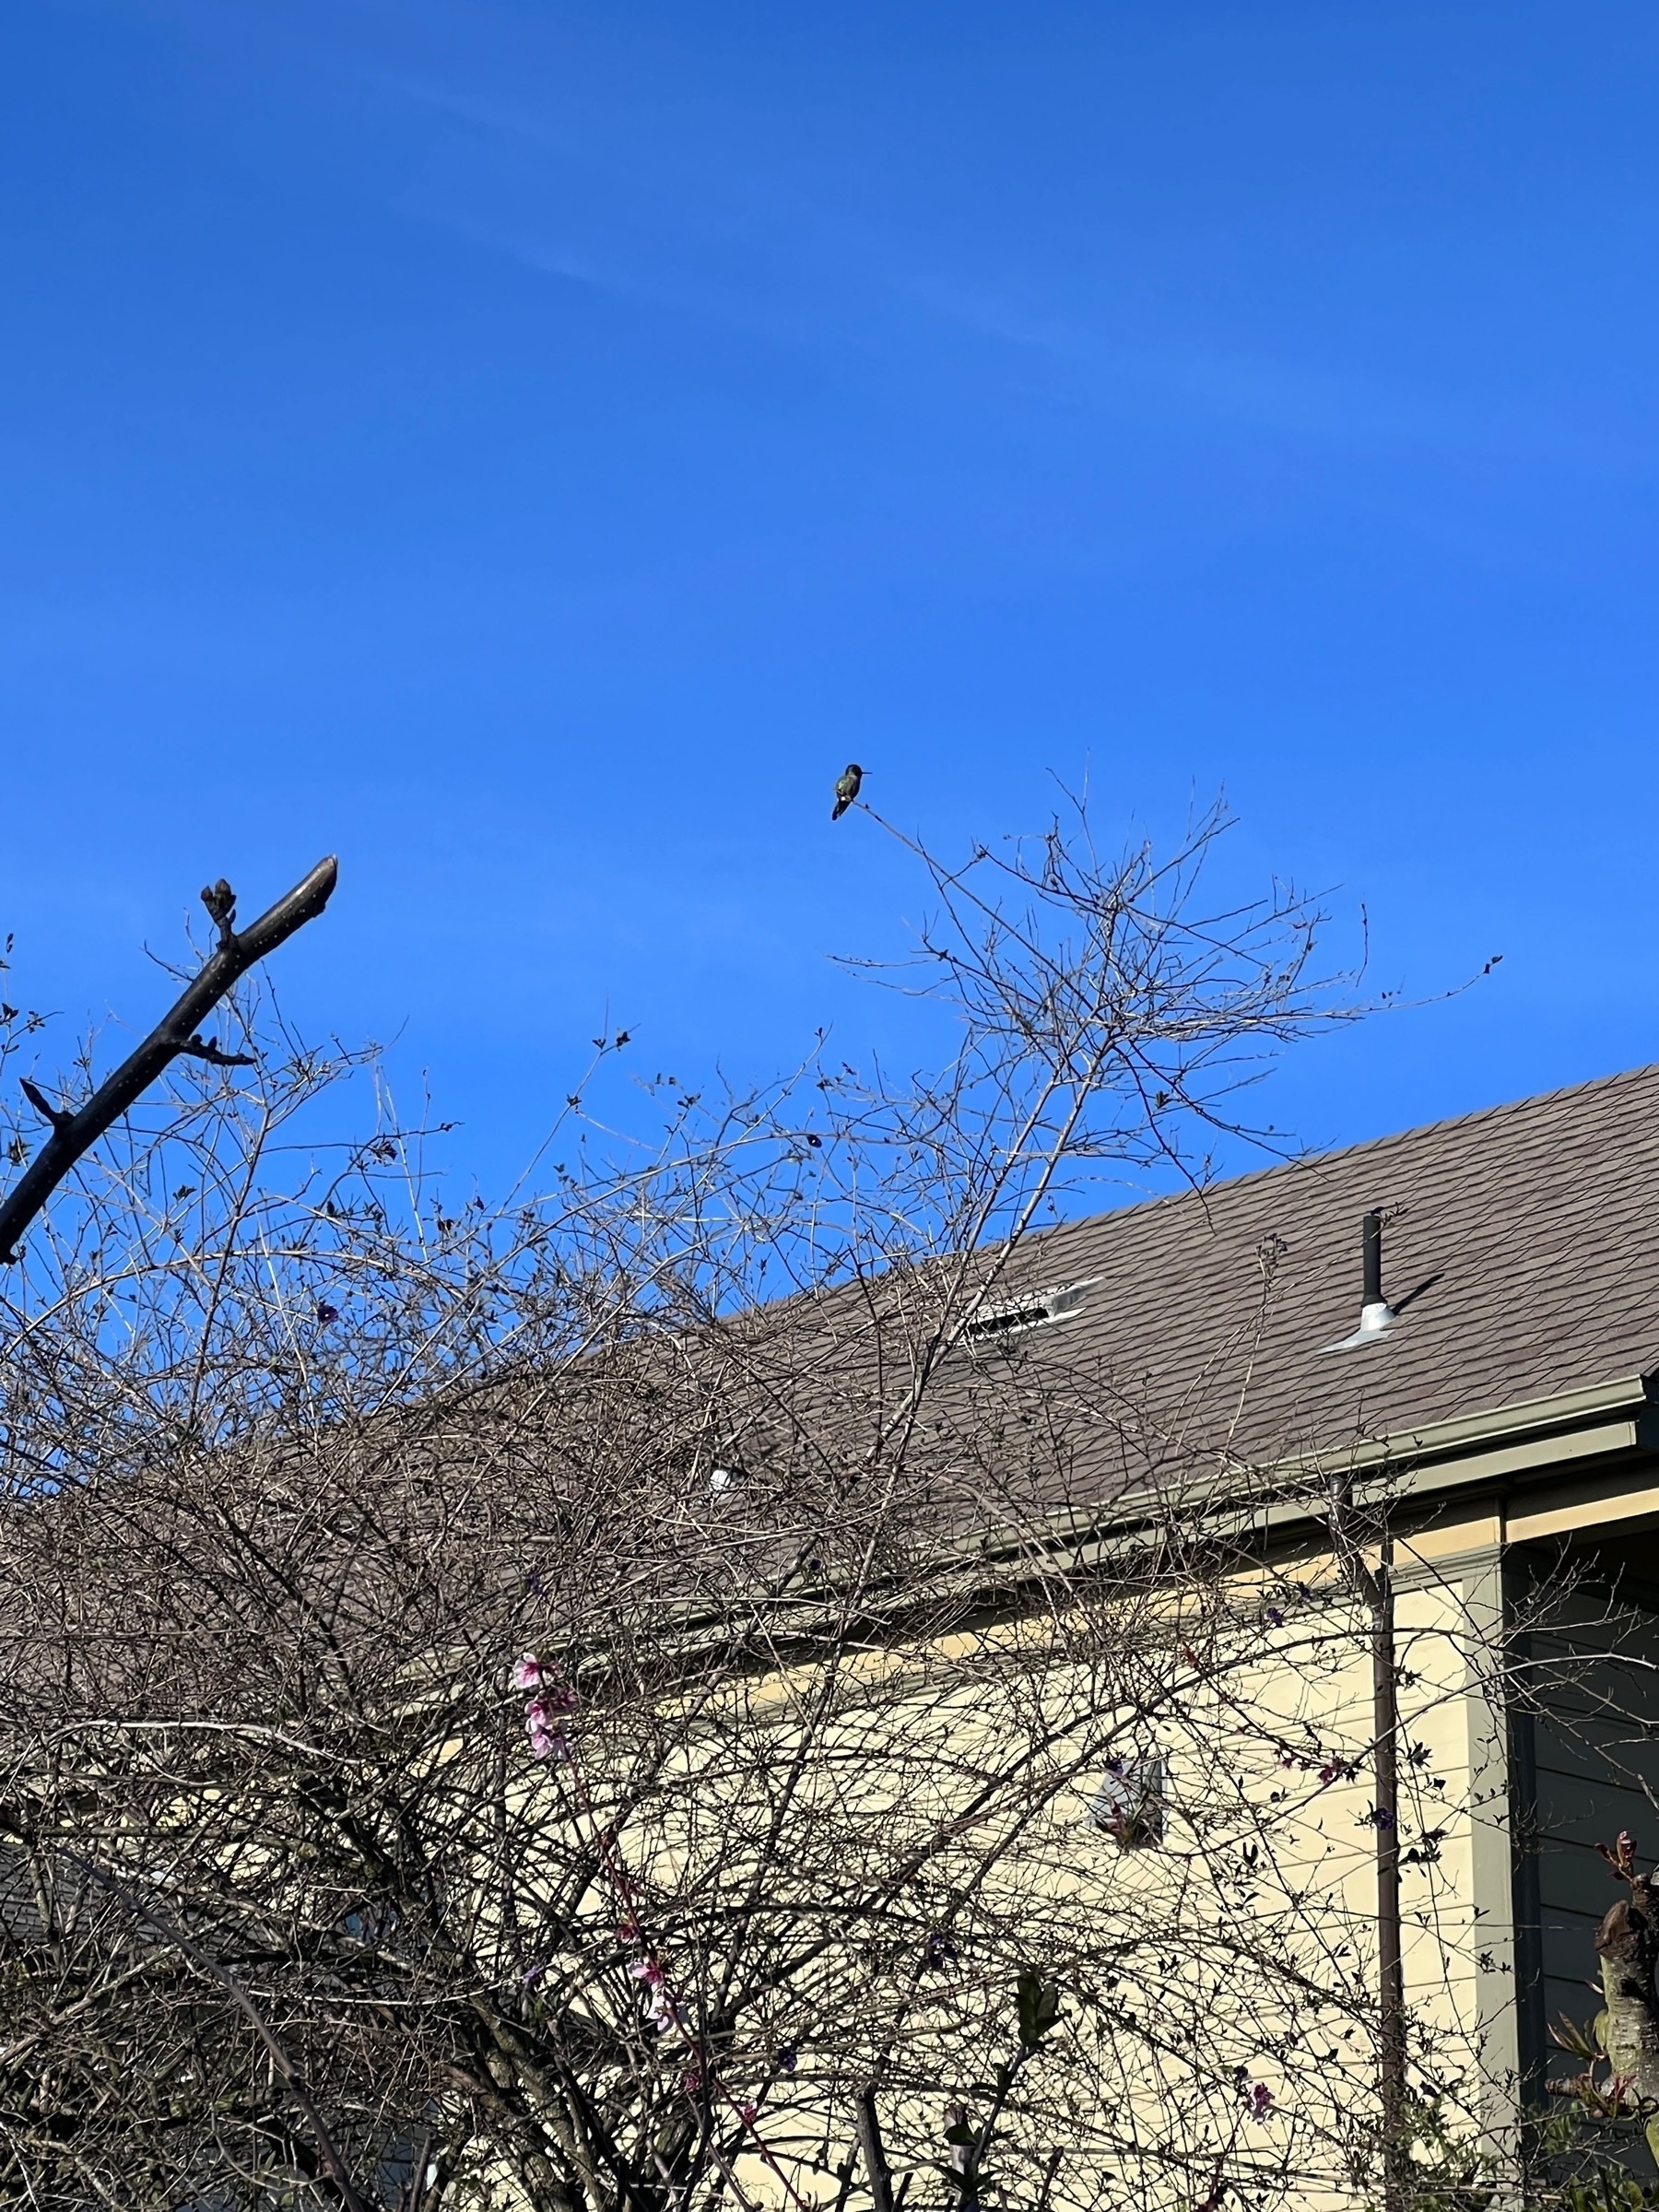 Hummingbird perched on the branches of a bare tree; the corner of a house in the background. 